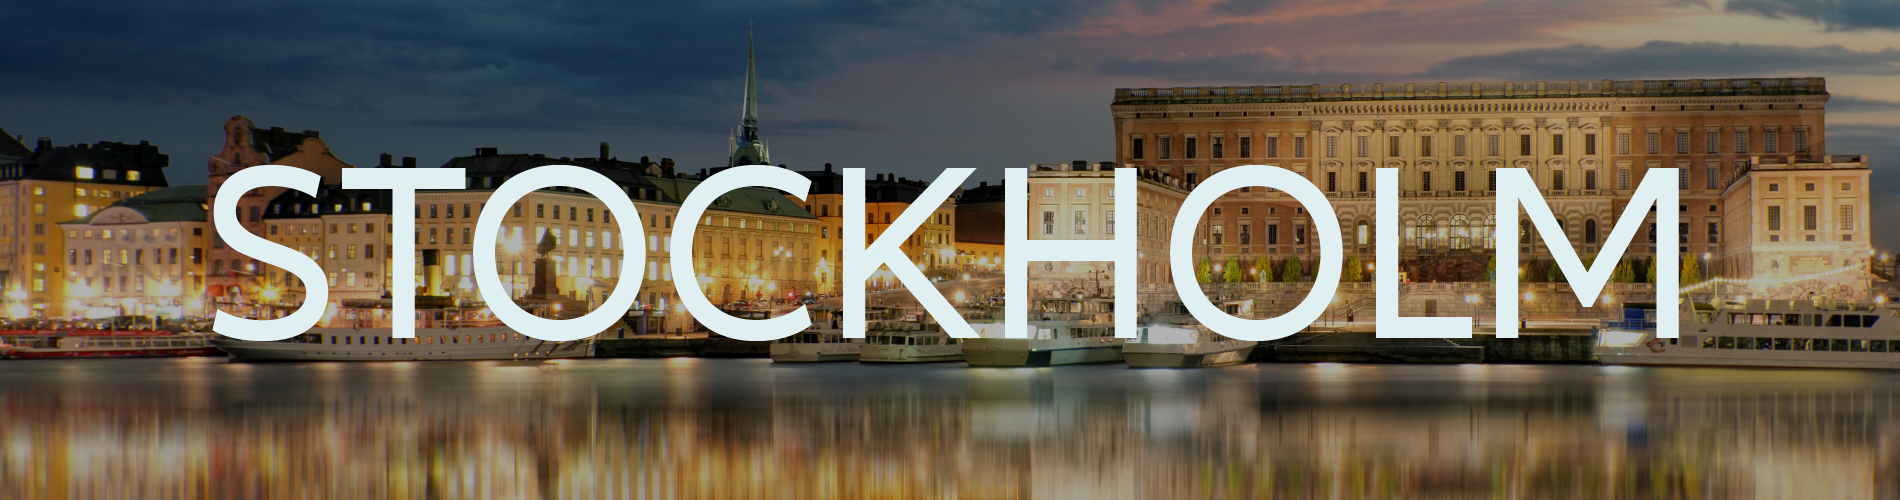 Cities that work- Stockholm